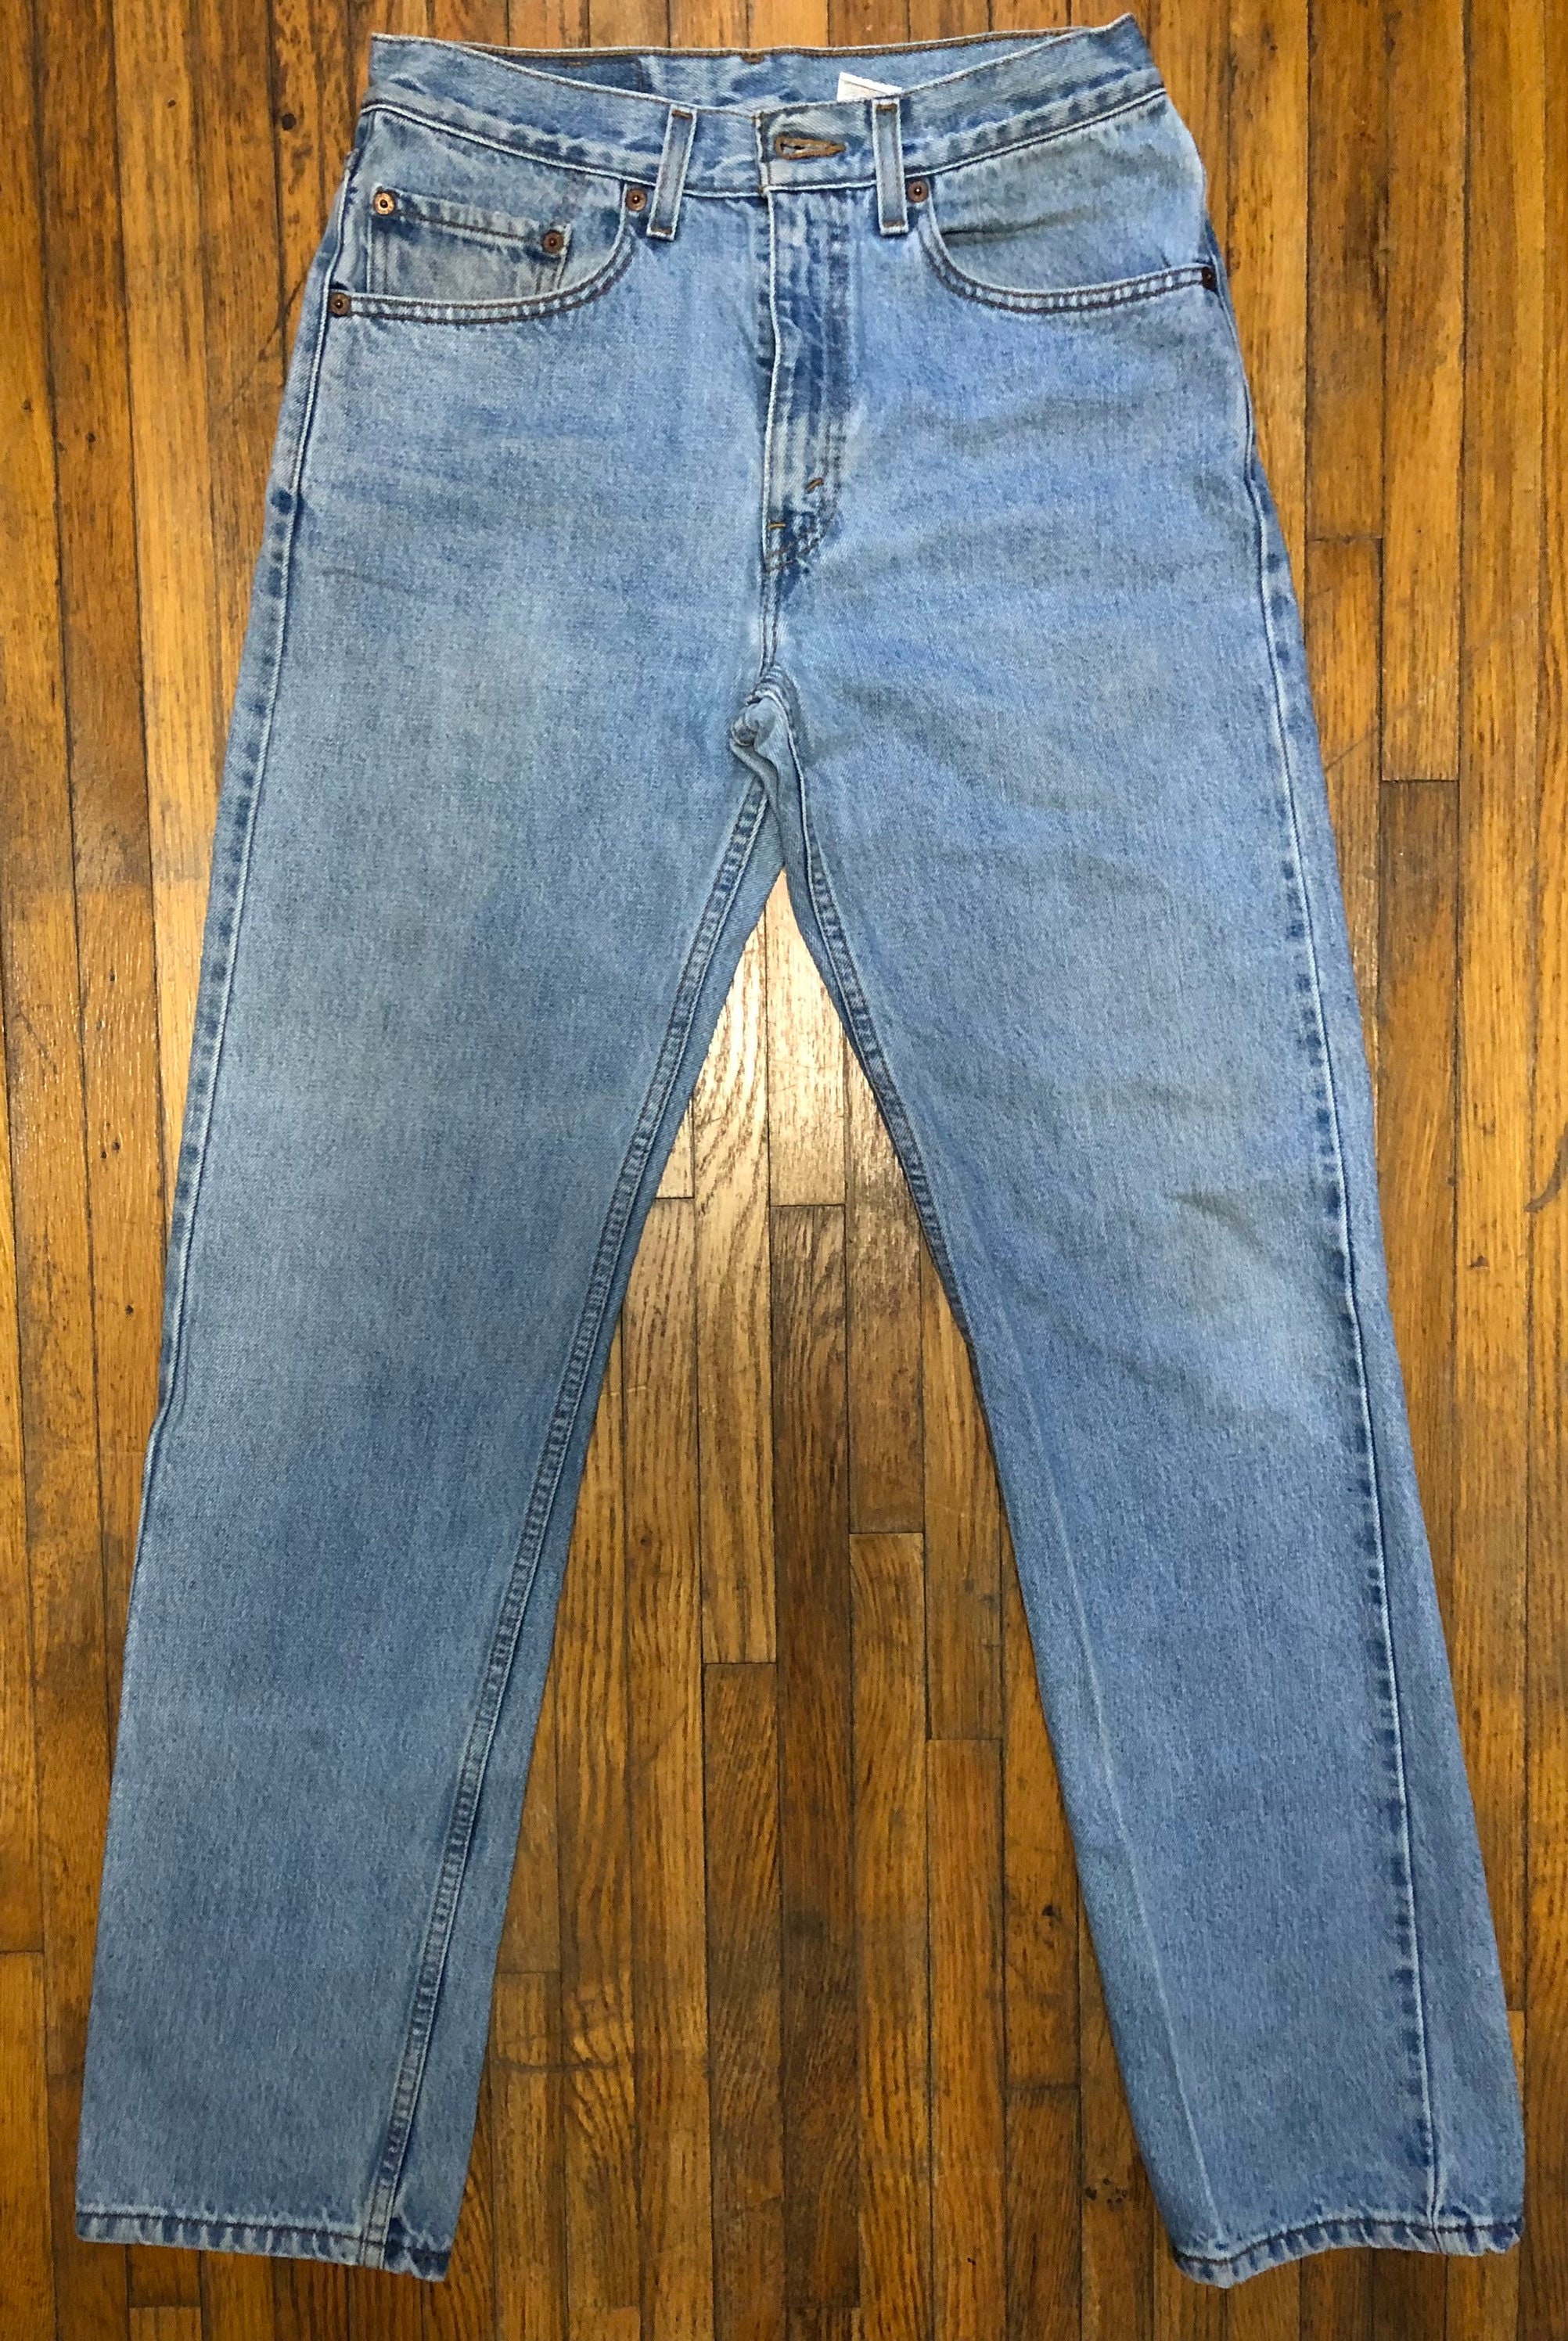 Vintage 1990s Levis 505 Jeans Made in Mexico Size 31x34 Light - Etsy